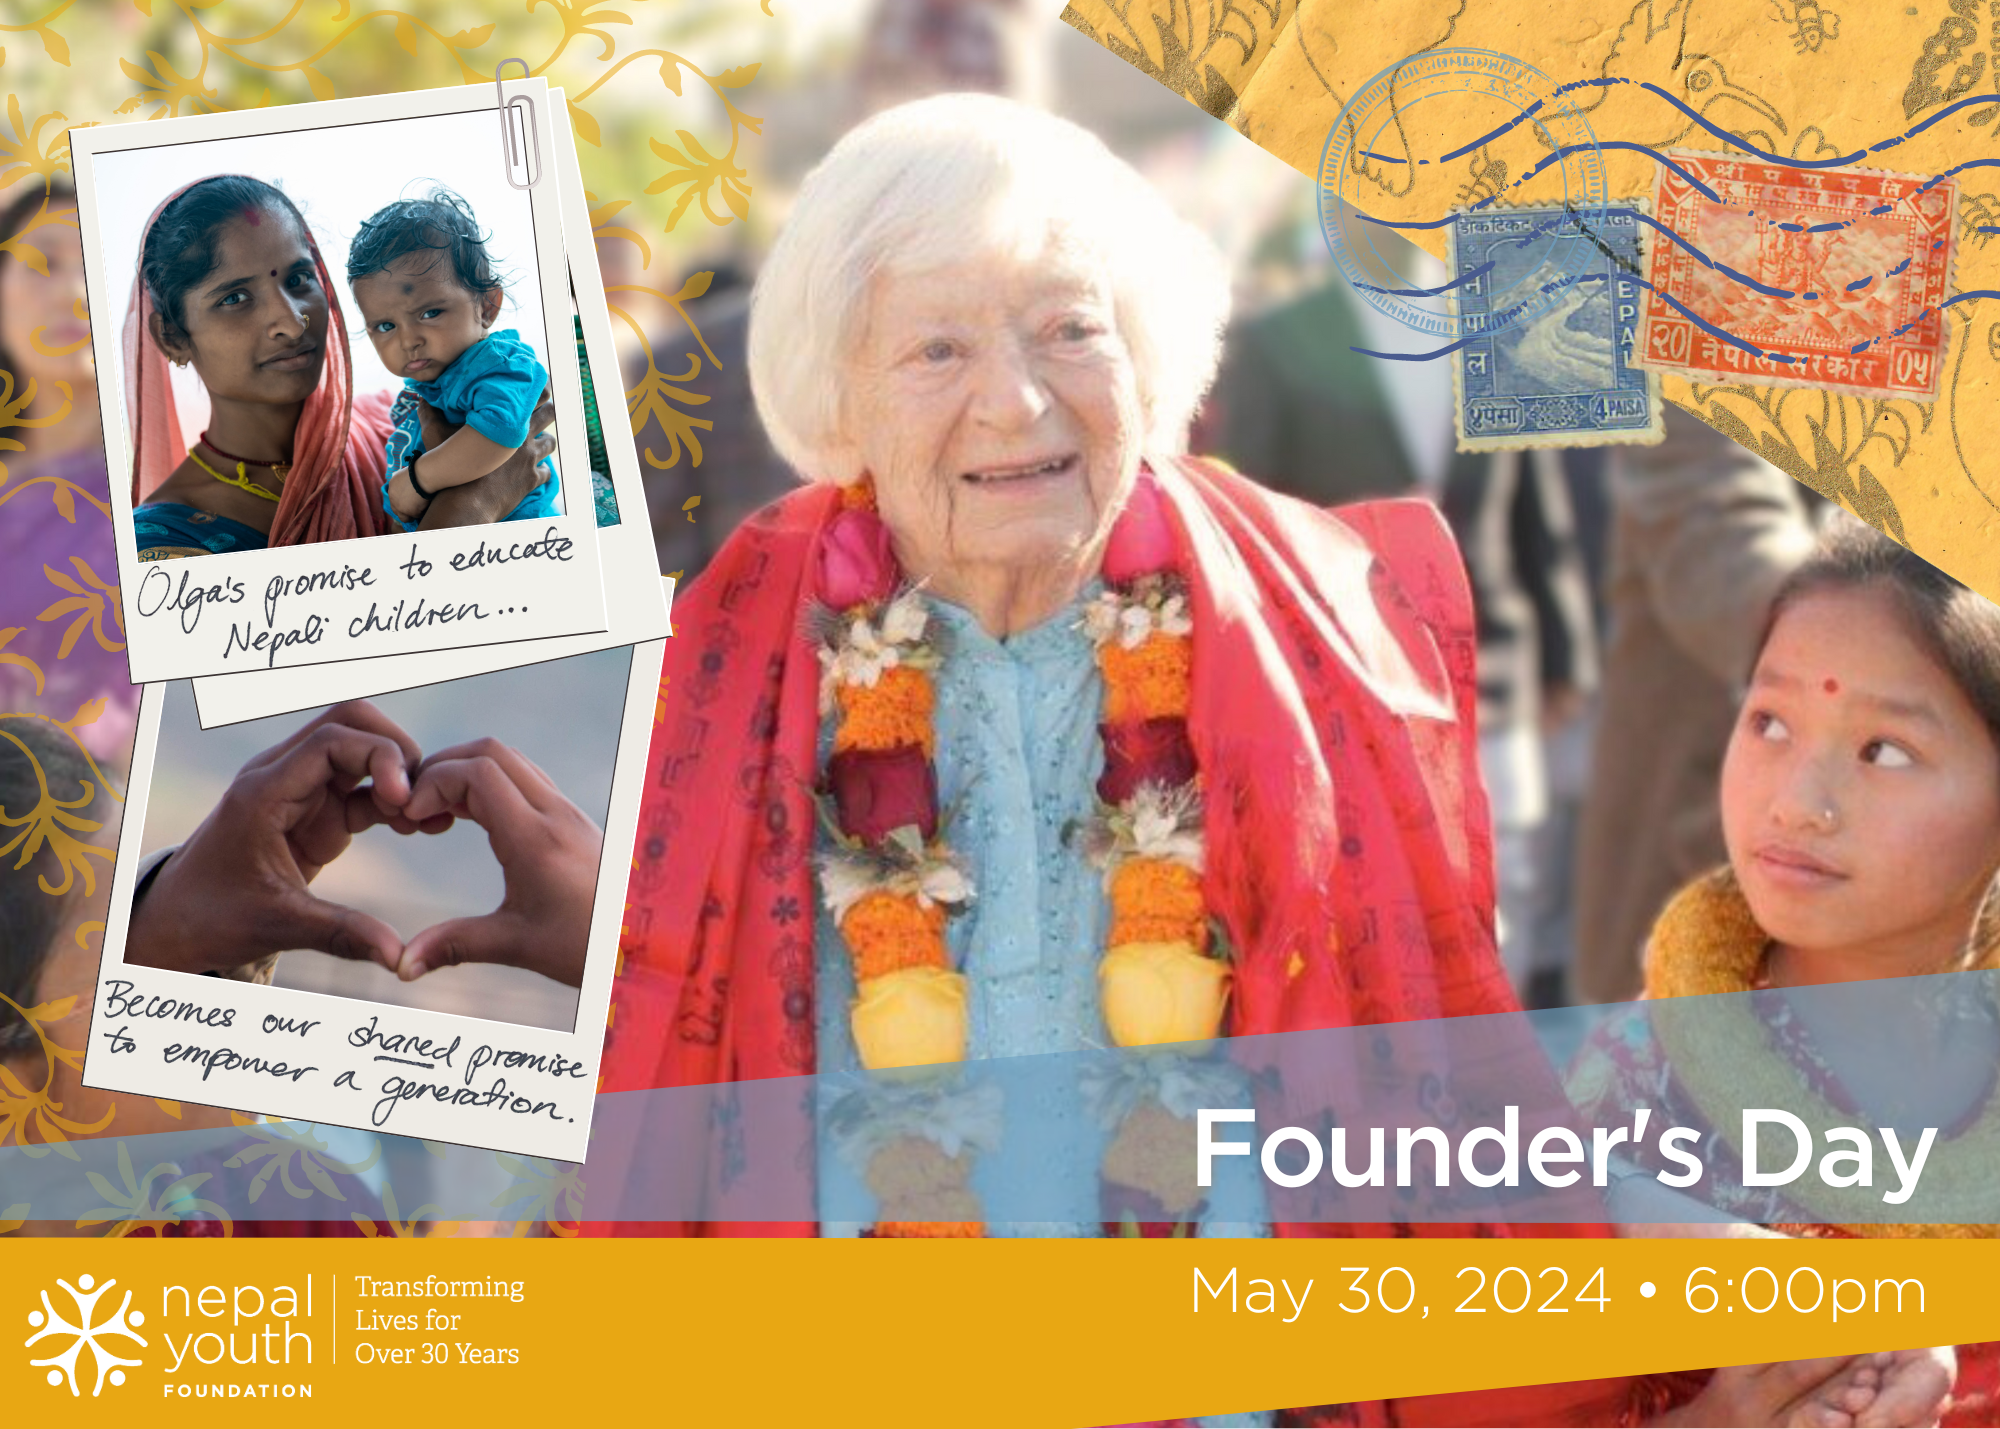 Join us on May 30th for Founder's Day 2024!